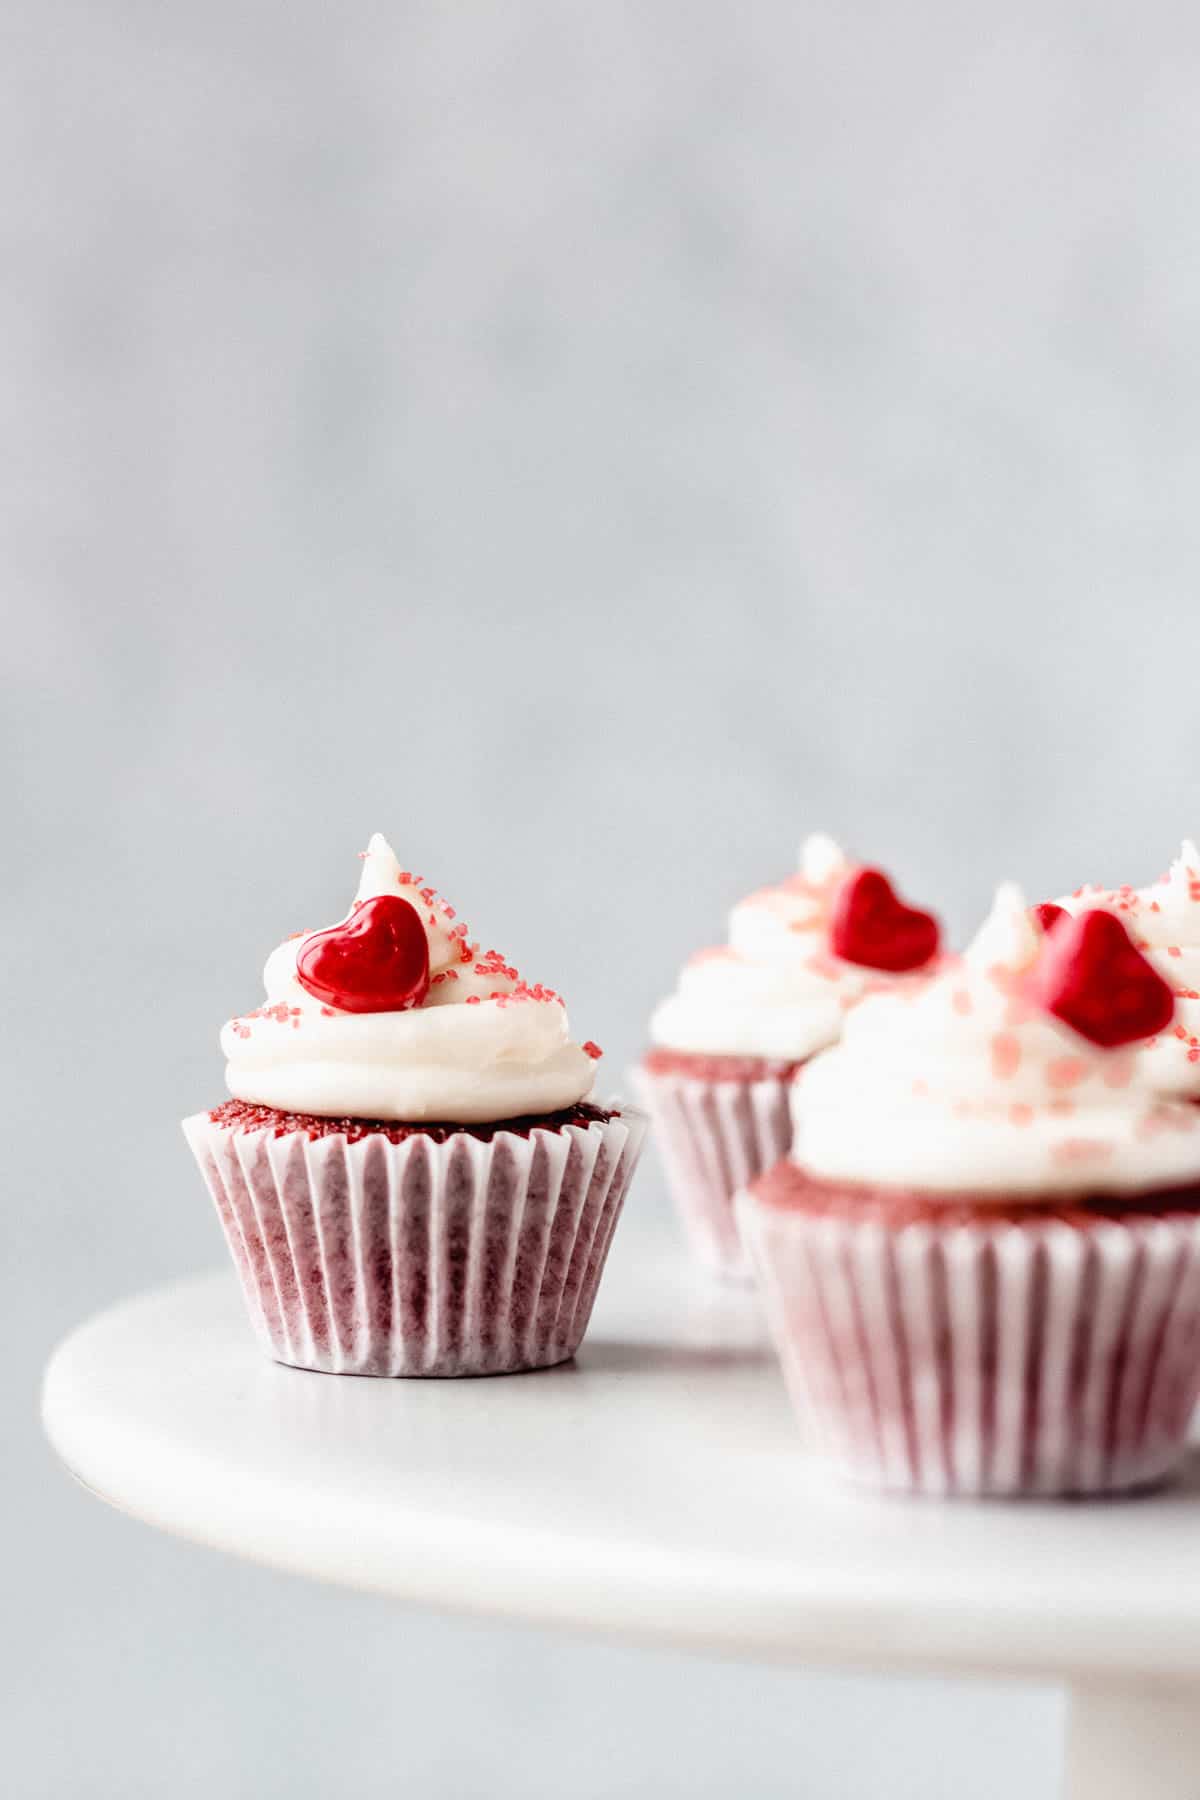 Mini Red Velvet Cupcakes on a white cake stand with a gray background